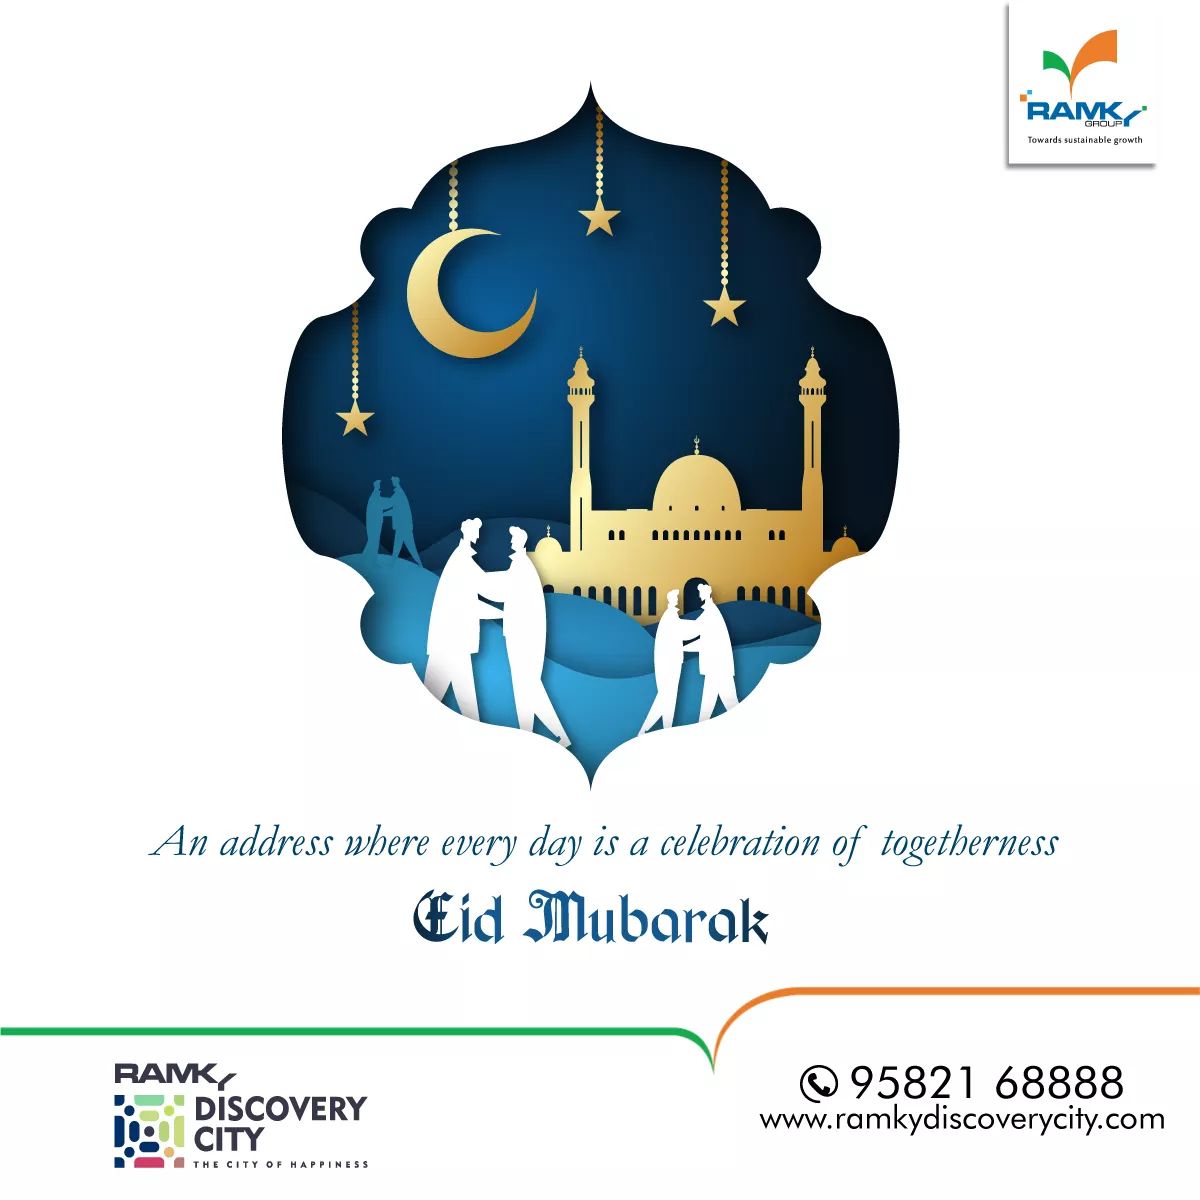 From festive feasts in spacious living spaces, to unending gossip sessions on lavish balconies, to fun get-together in the Multipurpose Halls, #ItsTheLittleThings that make for special memories.
When #YourHomeIsHere, every day is a celebration.
#EidMubarak #Eid #EidAlFitr2019